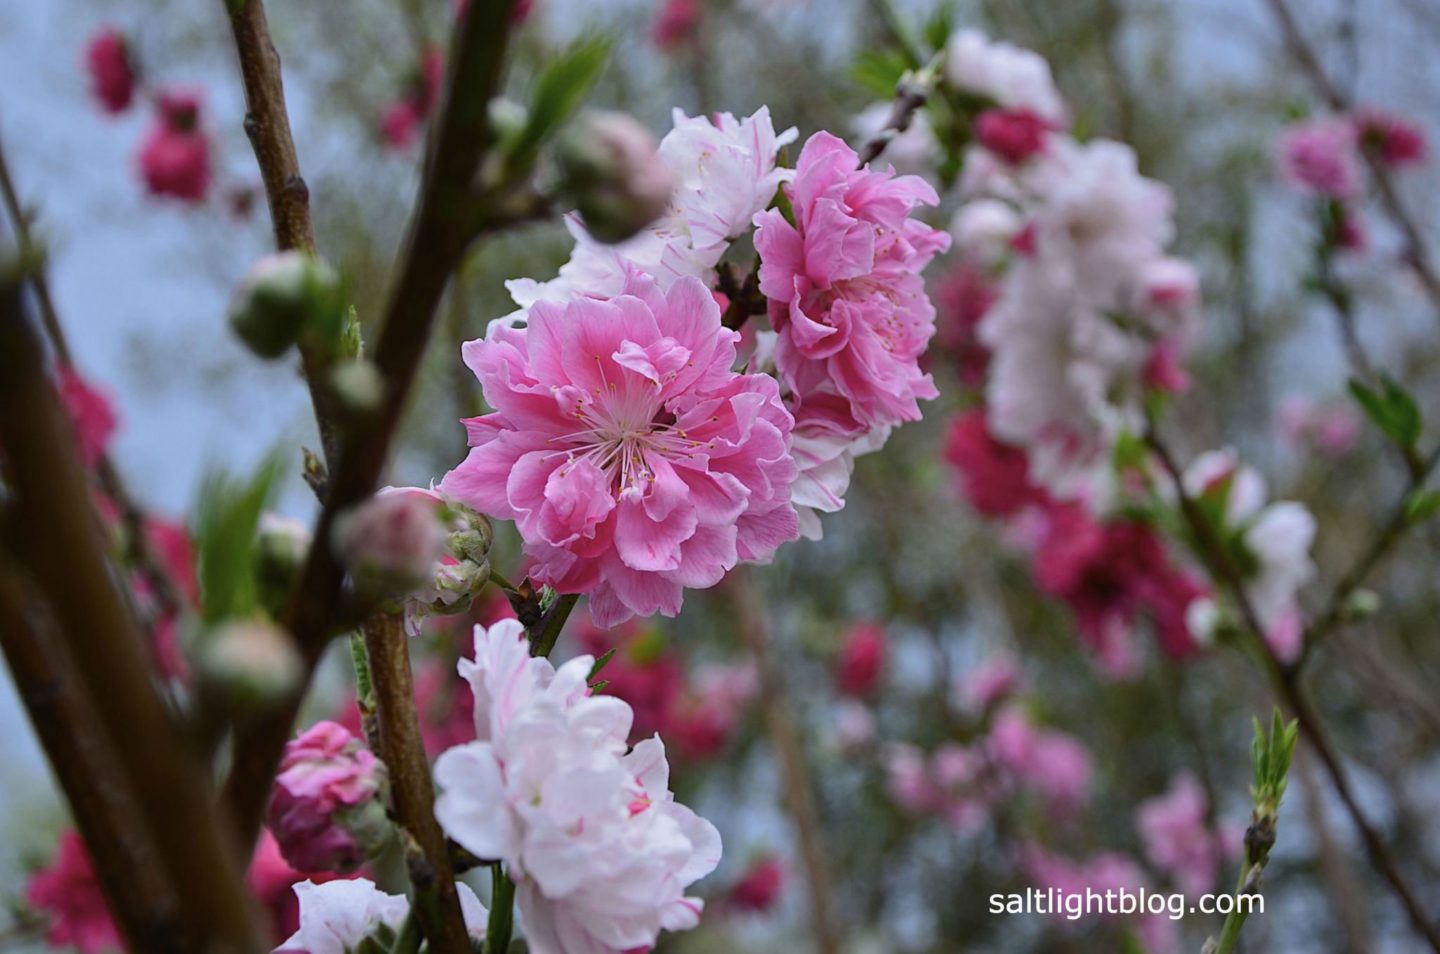 Our Peppermint Peach Tree's gorgeous blossoms of pink, fuchsia and white